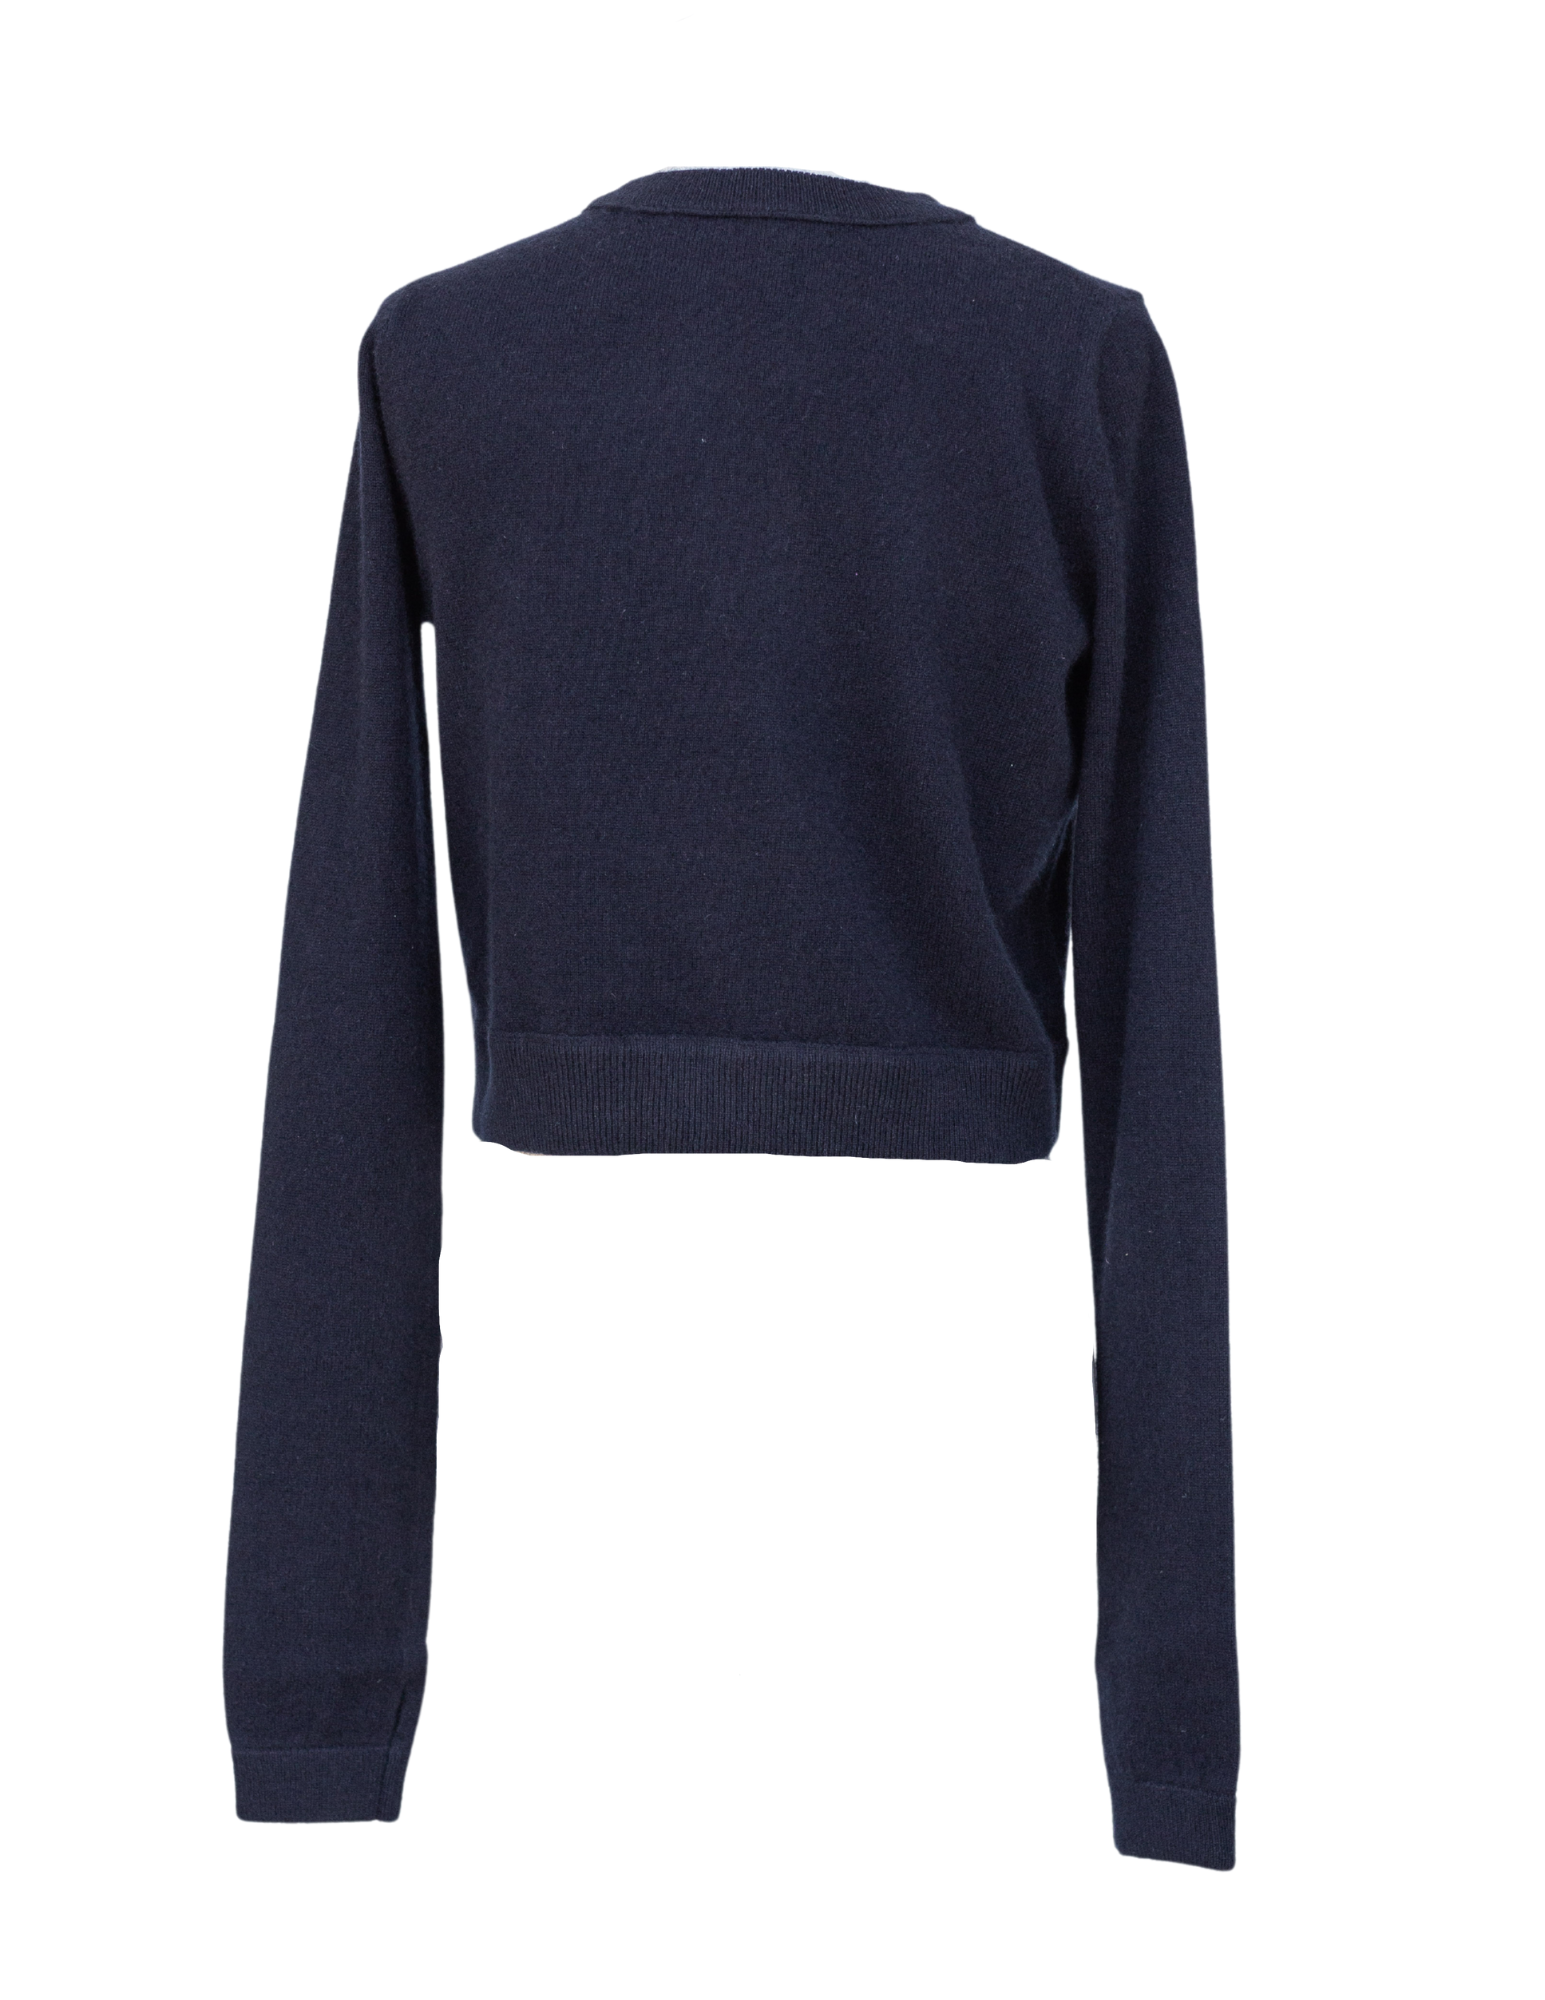 All Thumbs Sweater - Blue on Blue